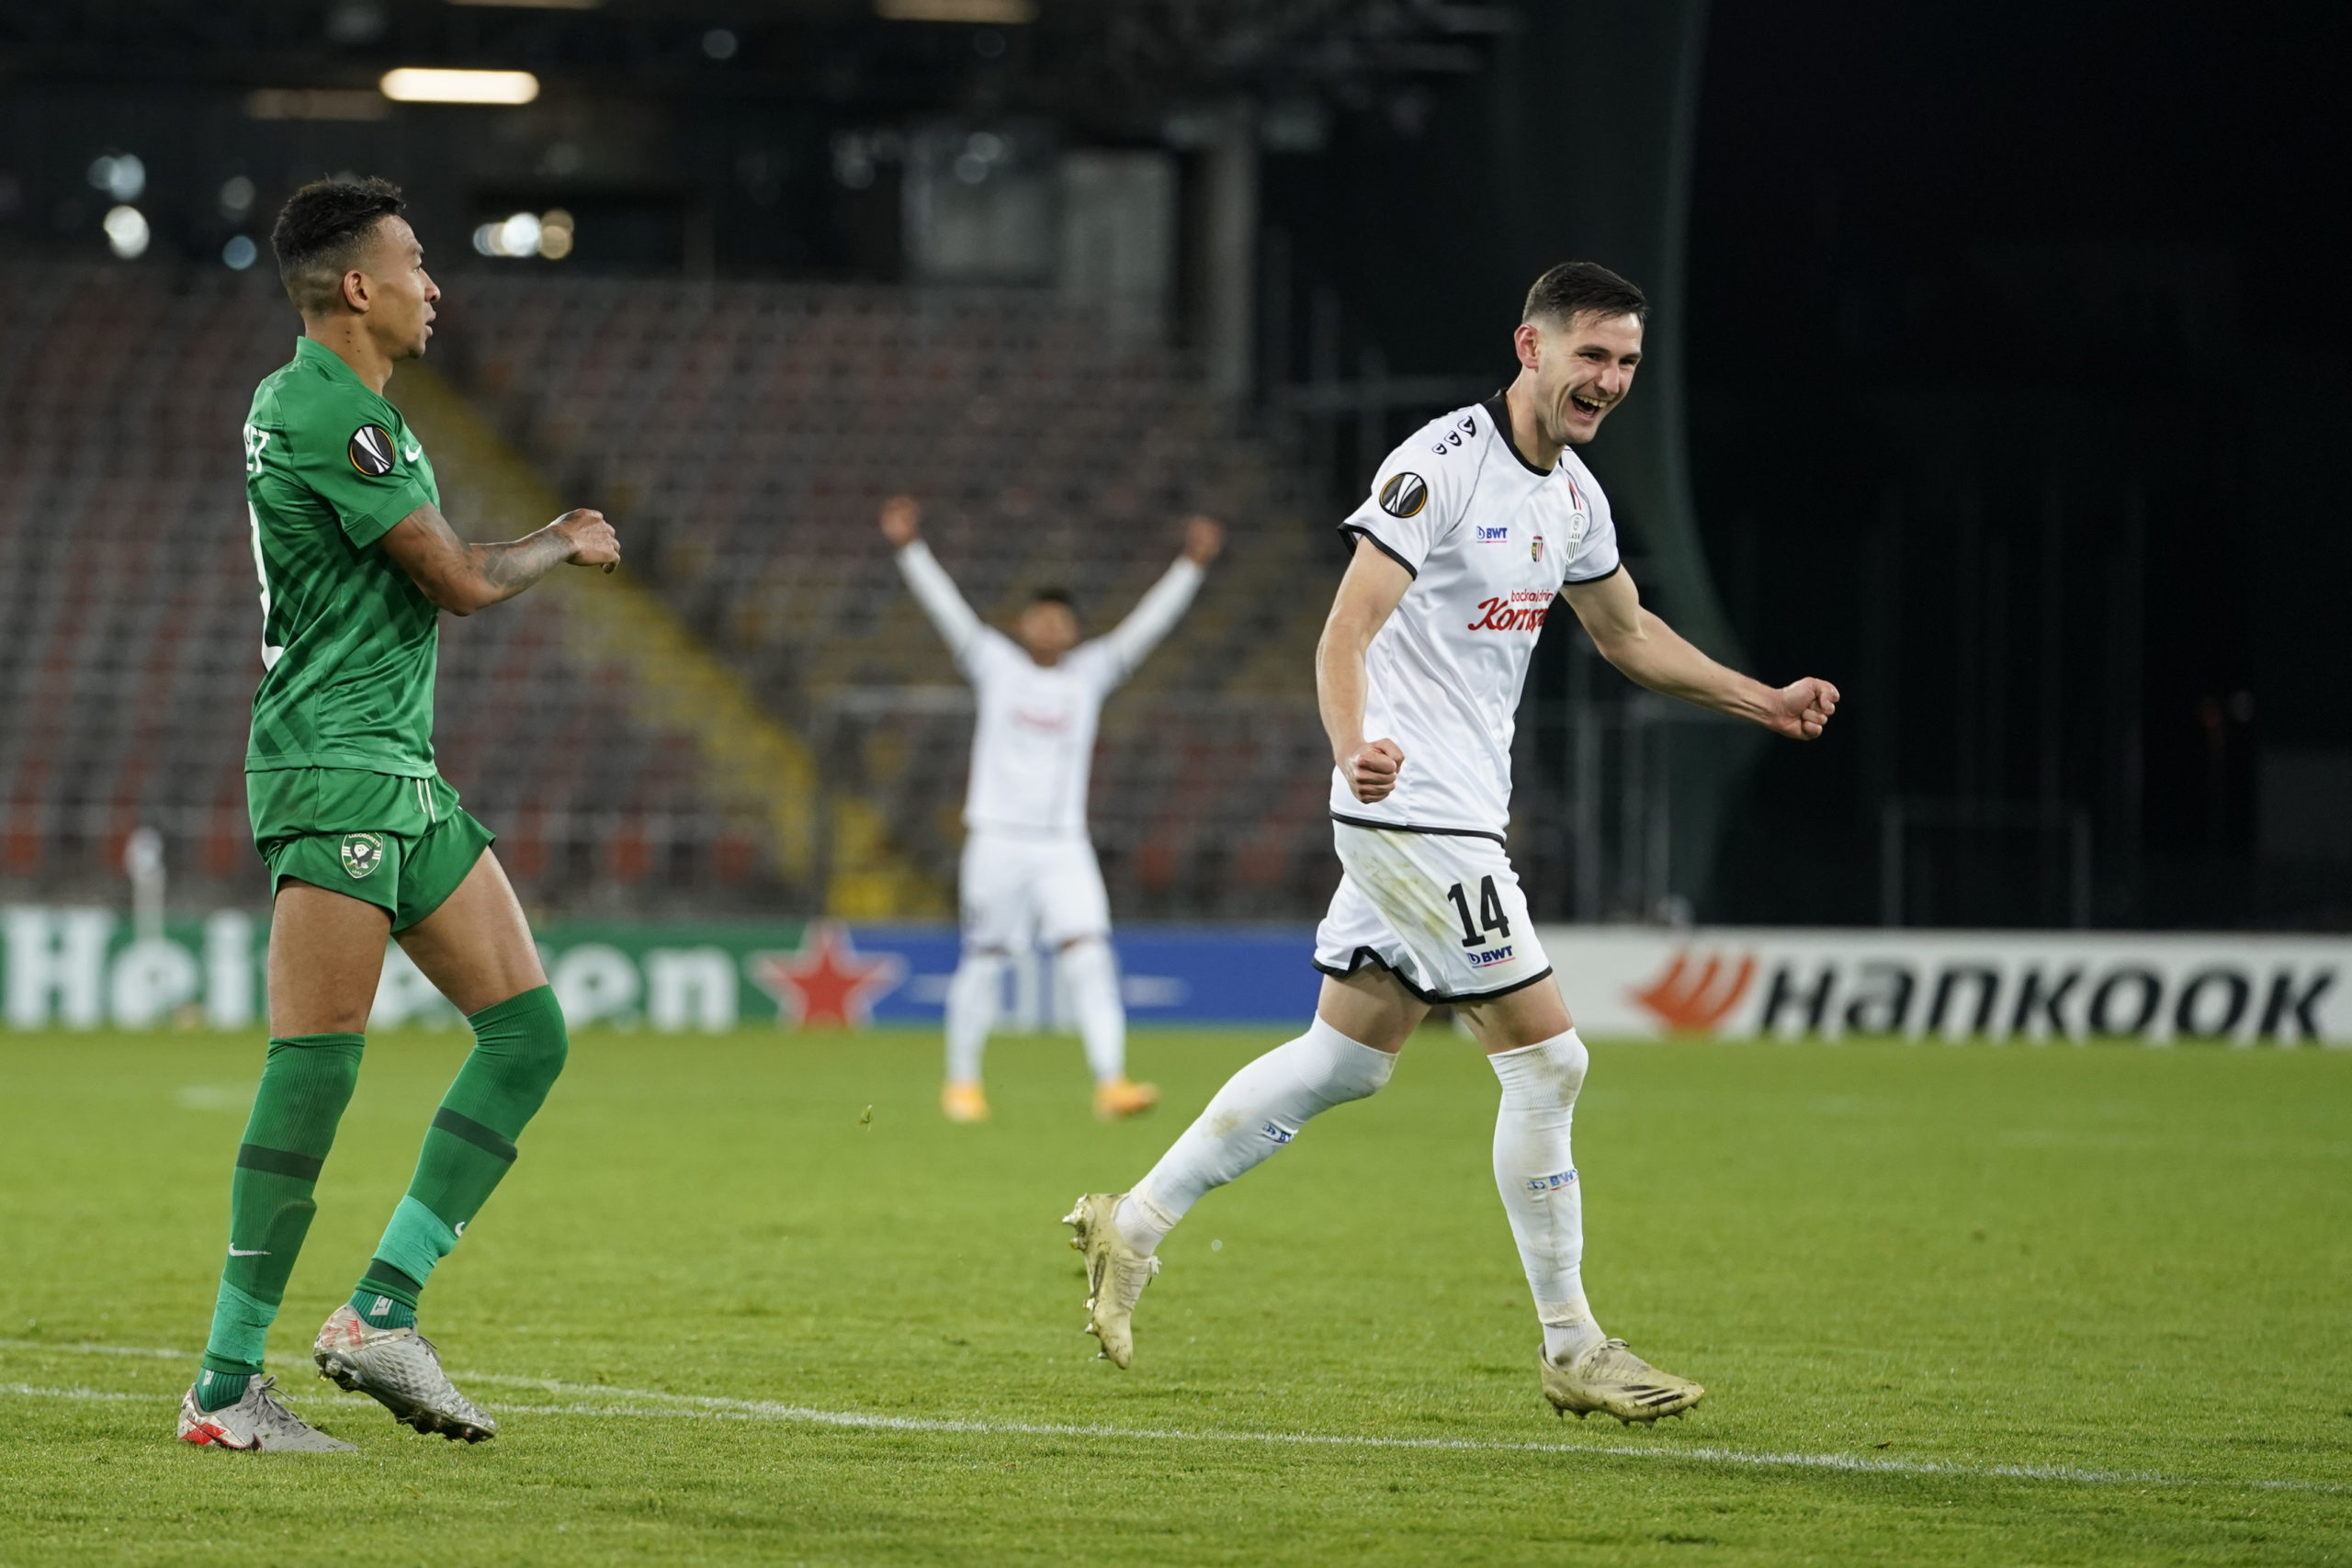 Report: Husein Balic interesting English clubs after 2019 Celtic link